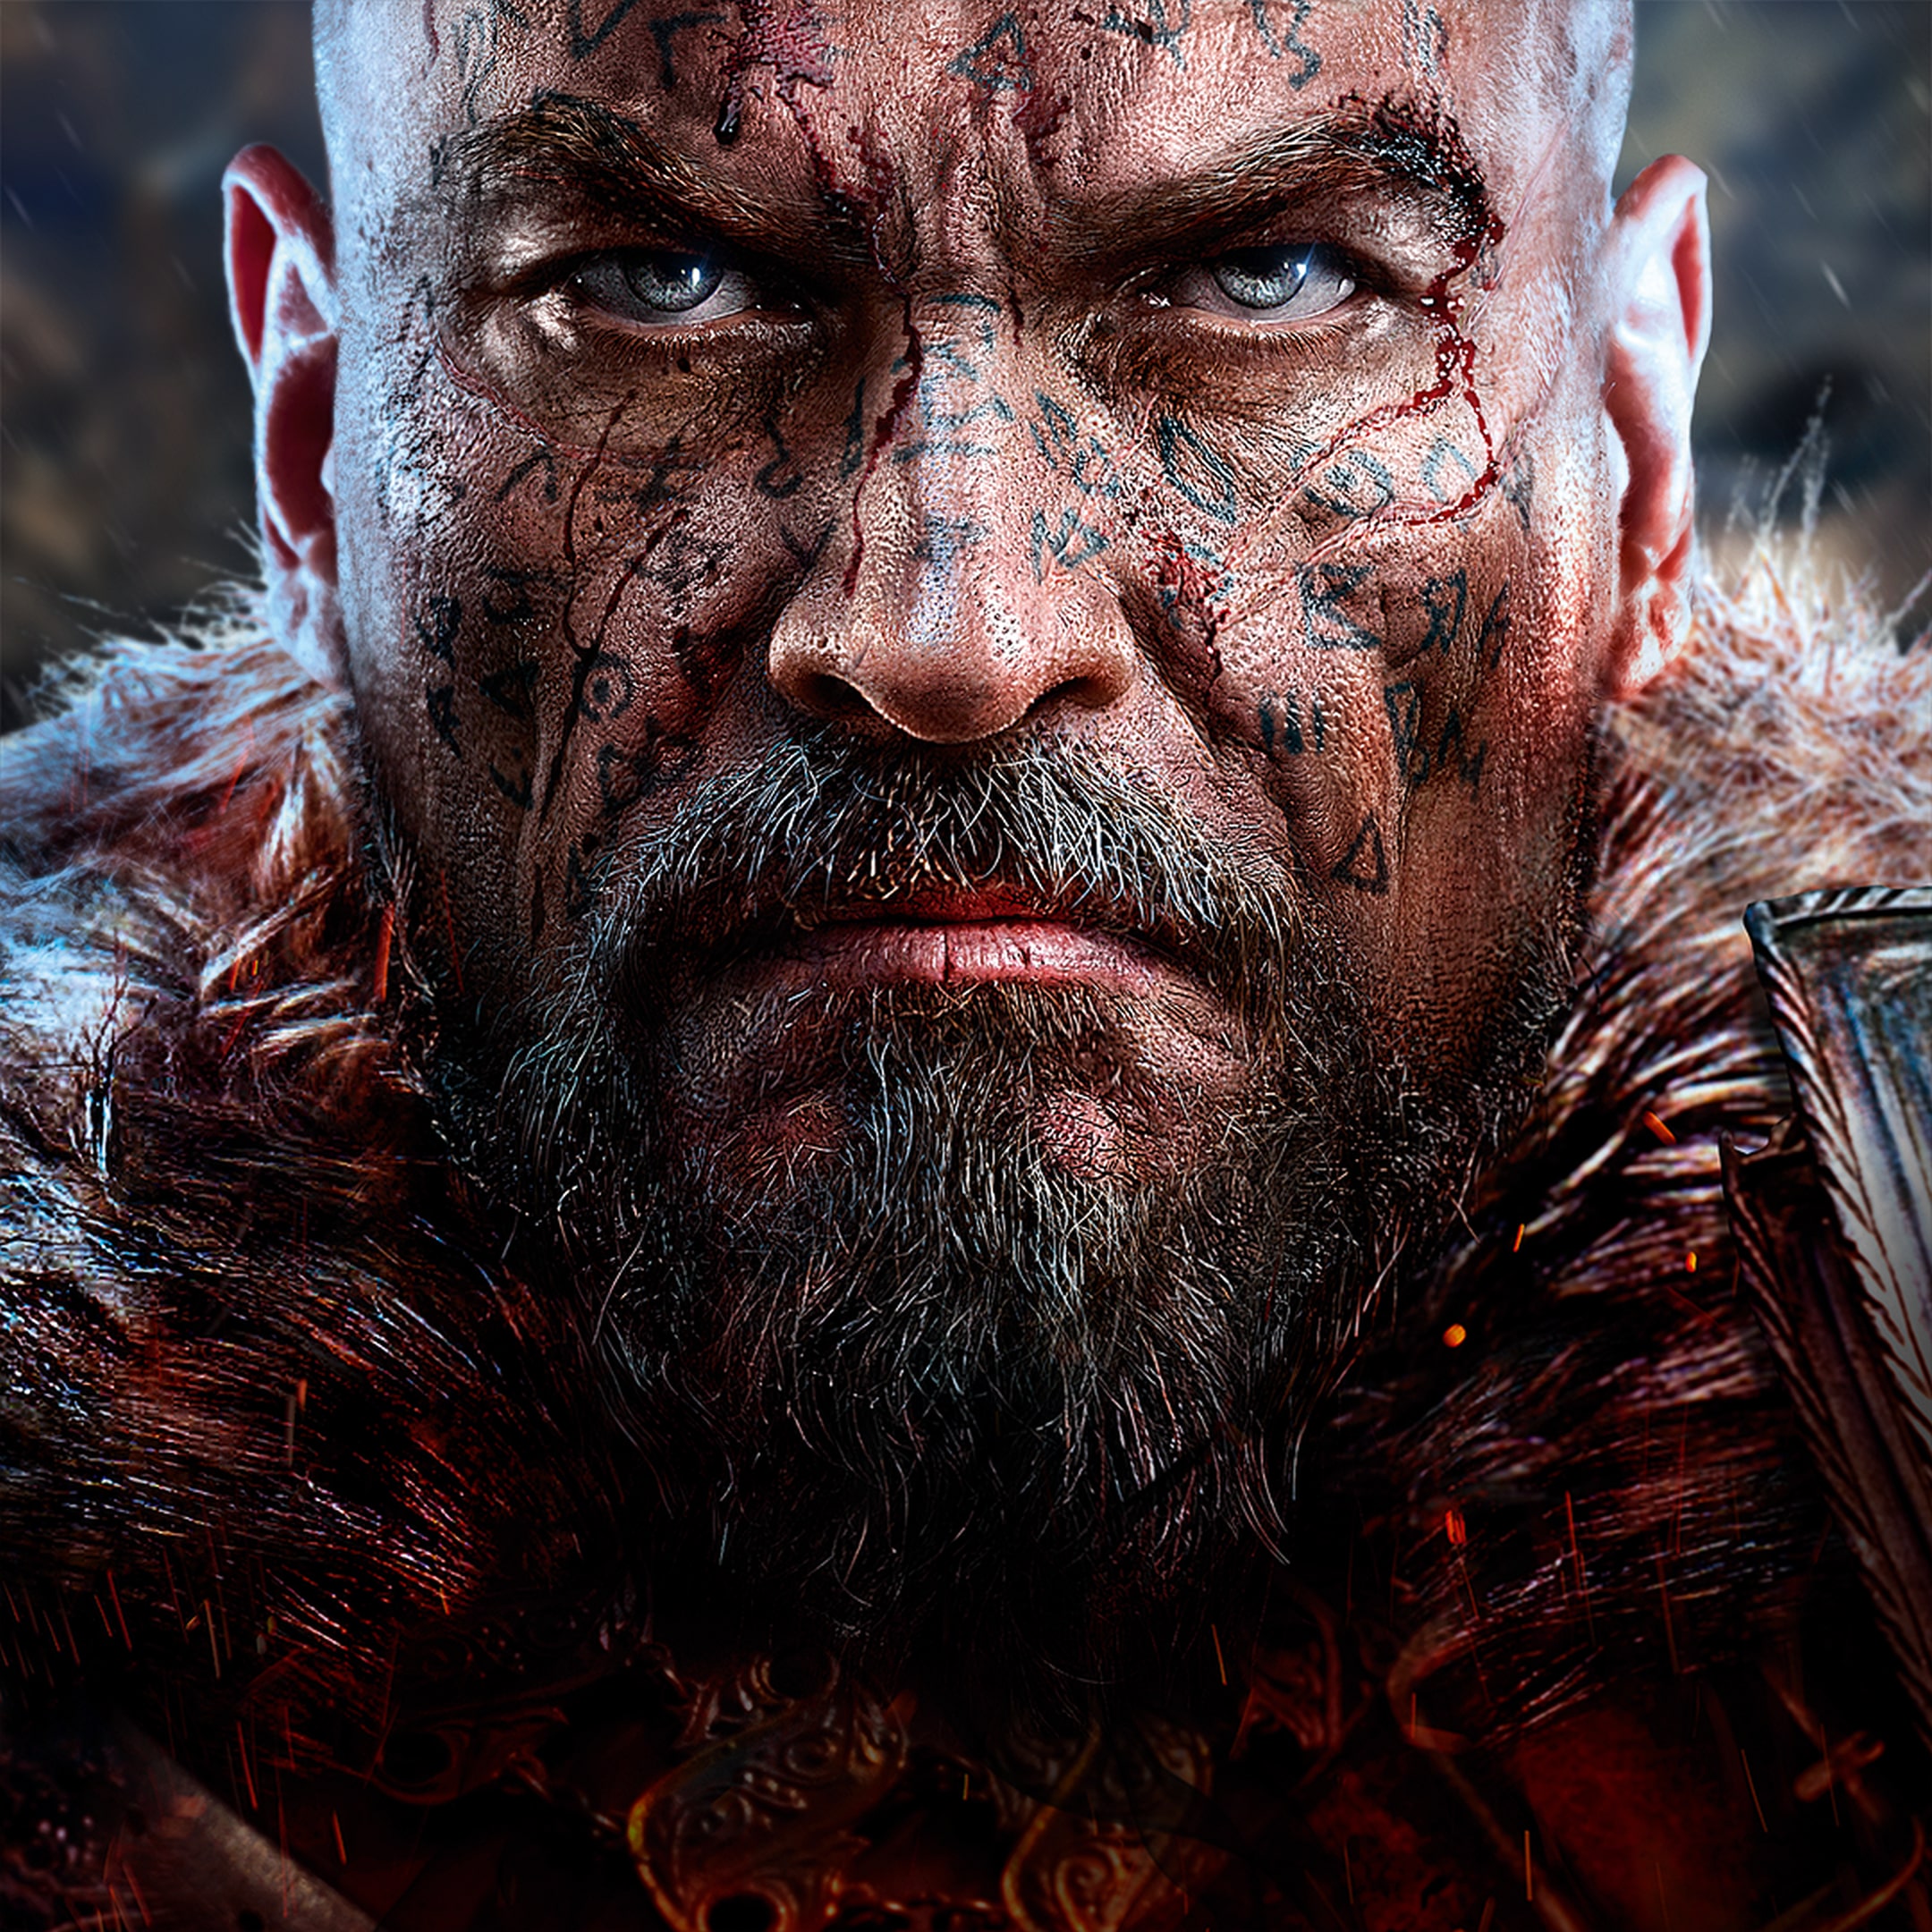 Lords of the Fallen, City Interactive USA, PlayStation 4, PS4CIT01610 